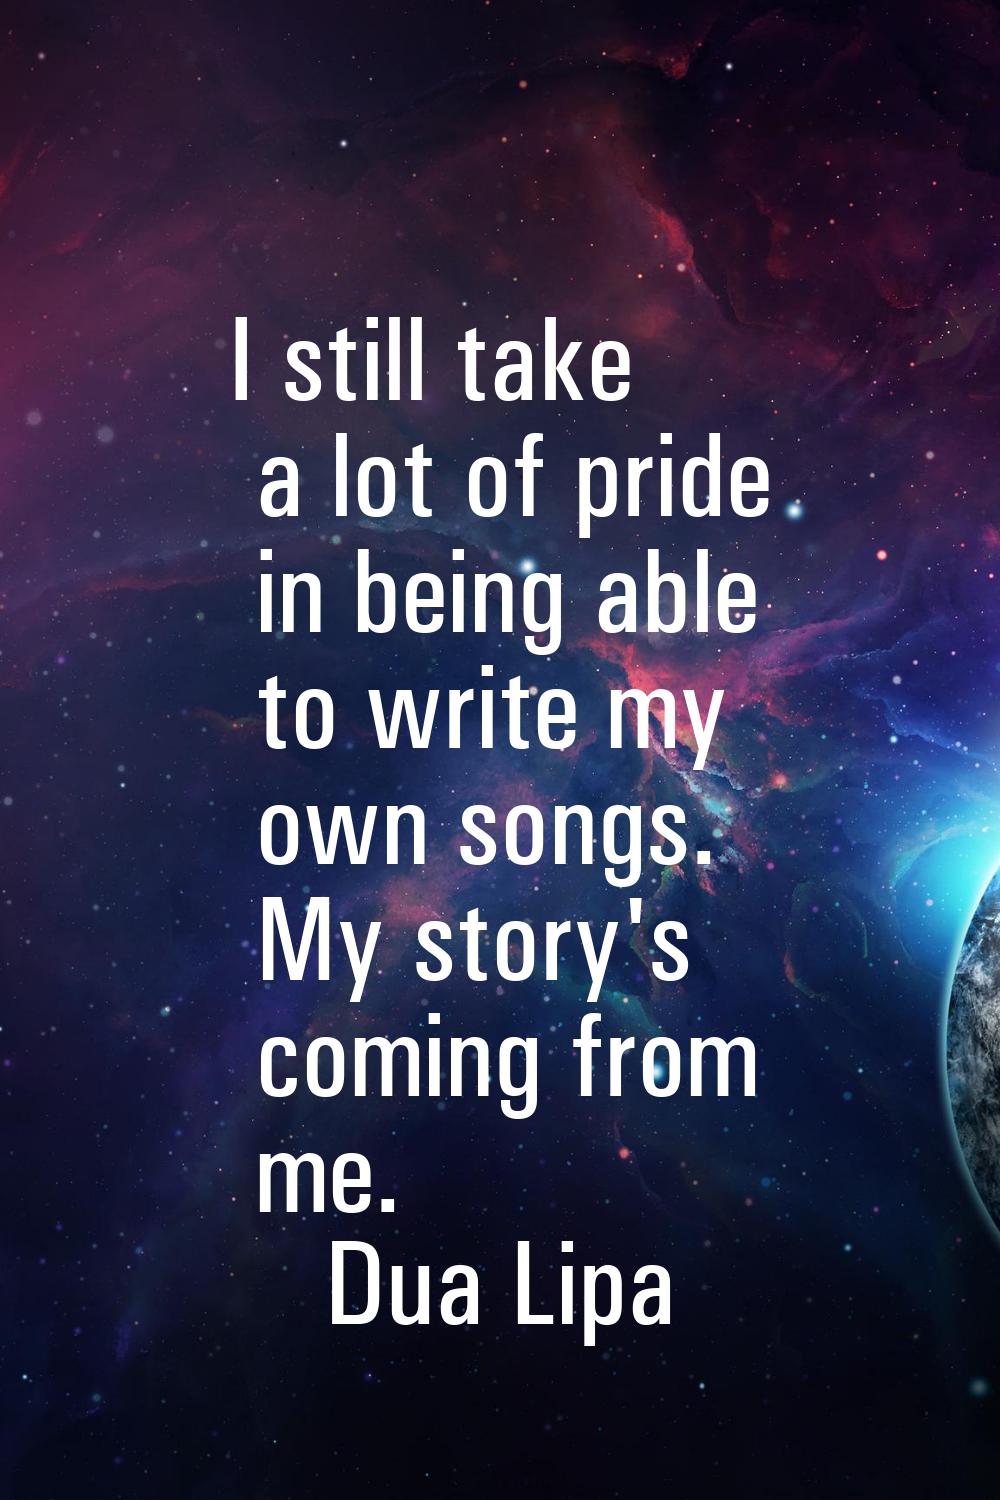 I still take a lot of pride in being able to write my own songs. My story's coming from me.